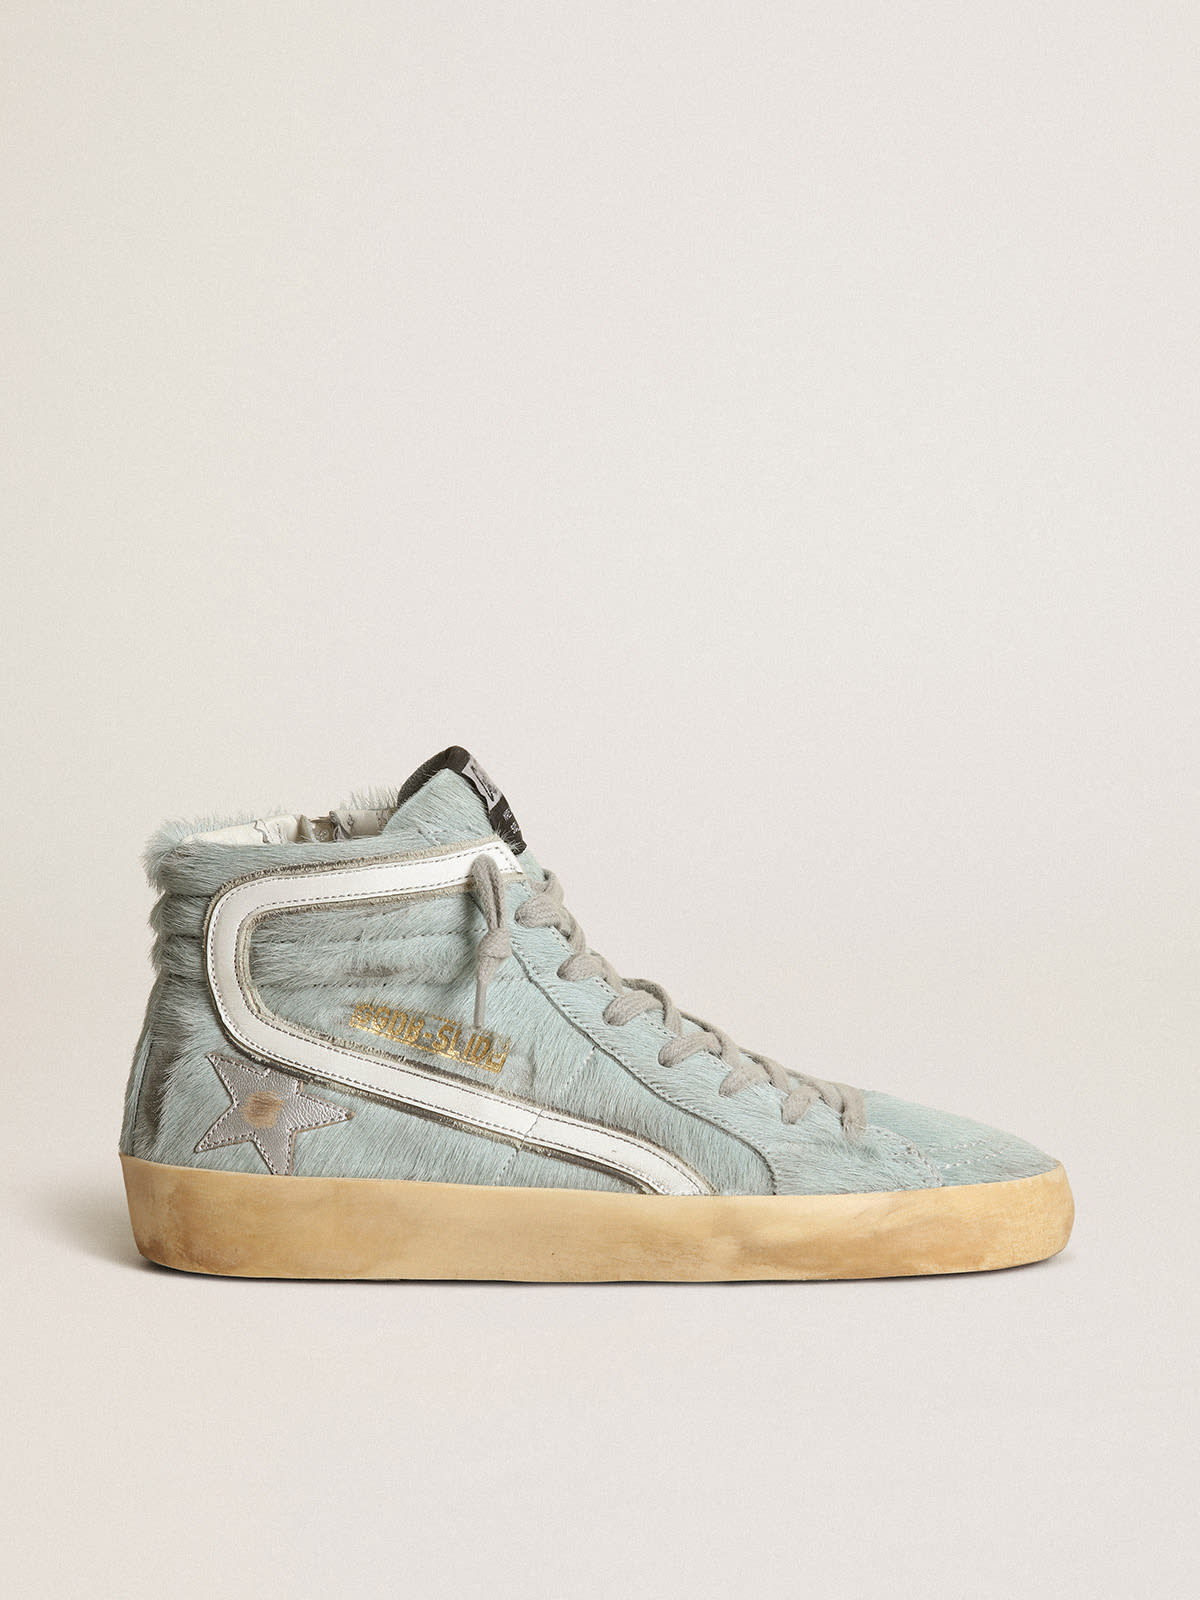 Golden Goose - Slide sneakers in aquamarine pony skin with silver laminated leather star in 